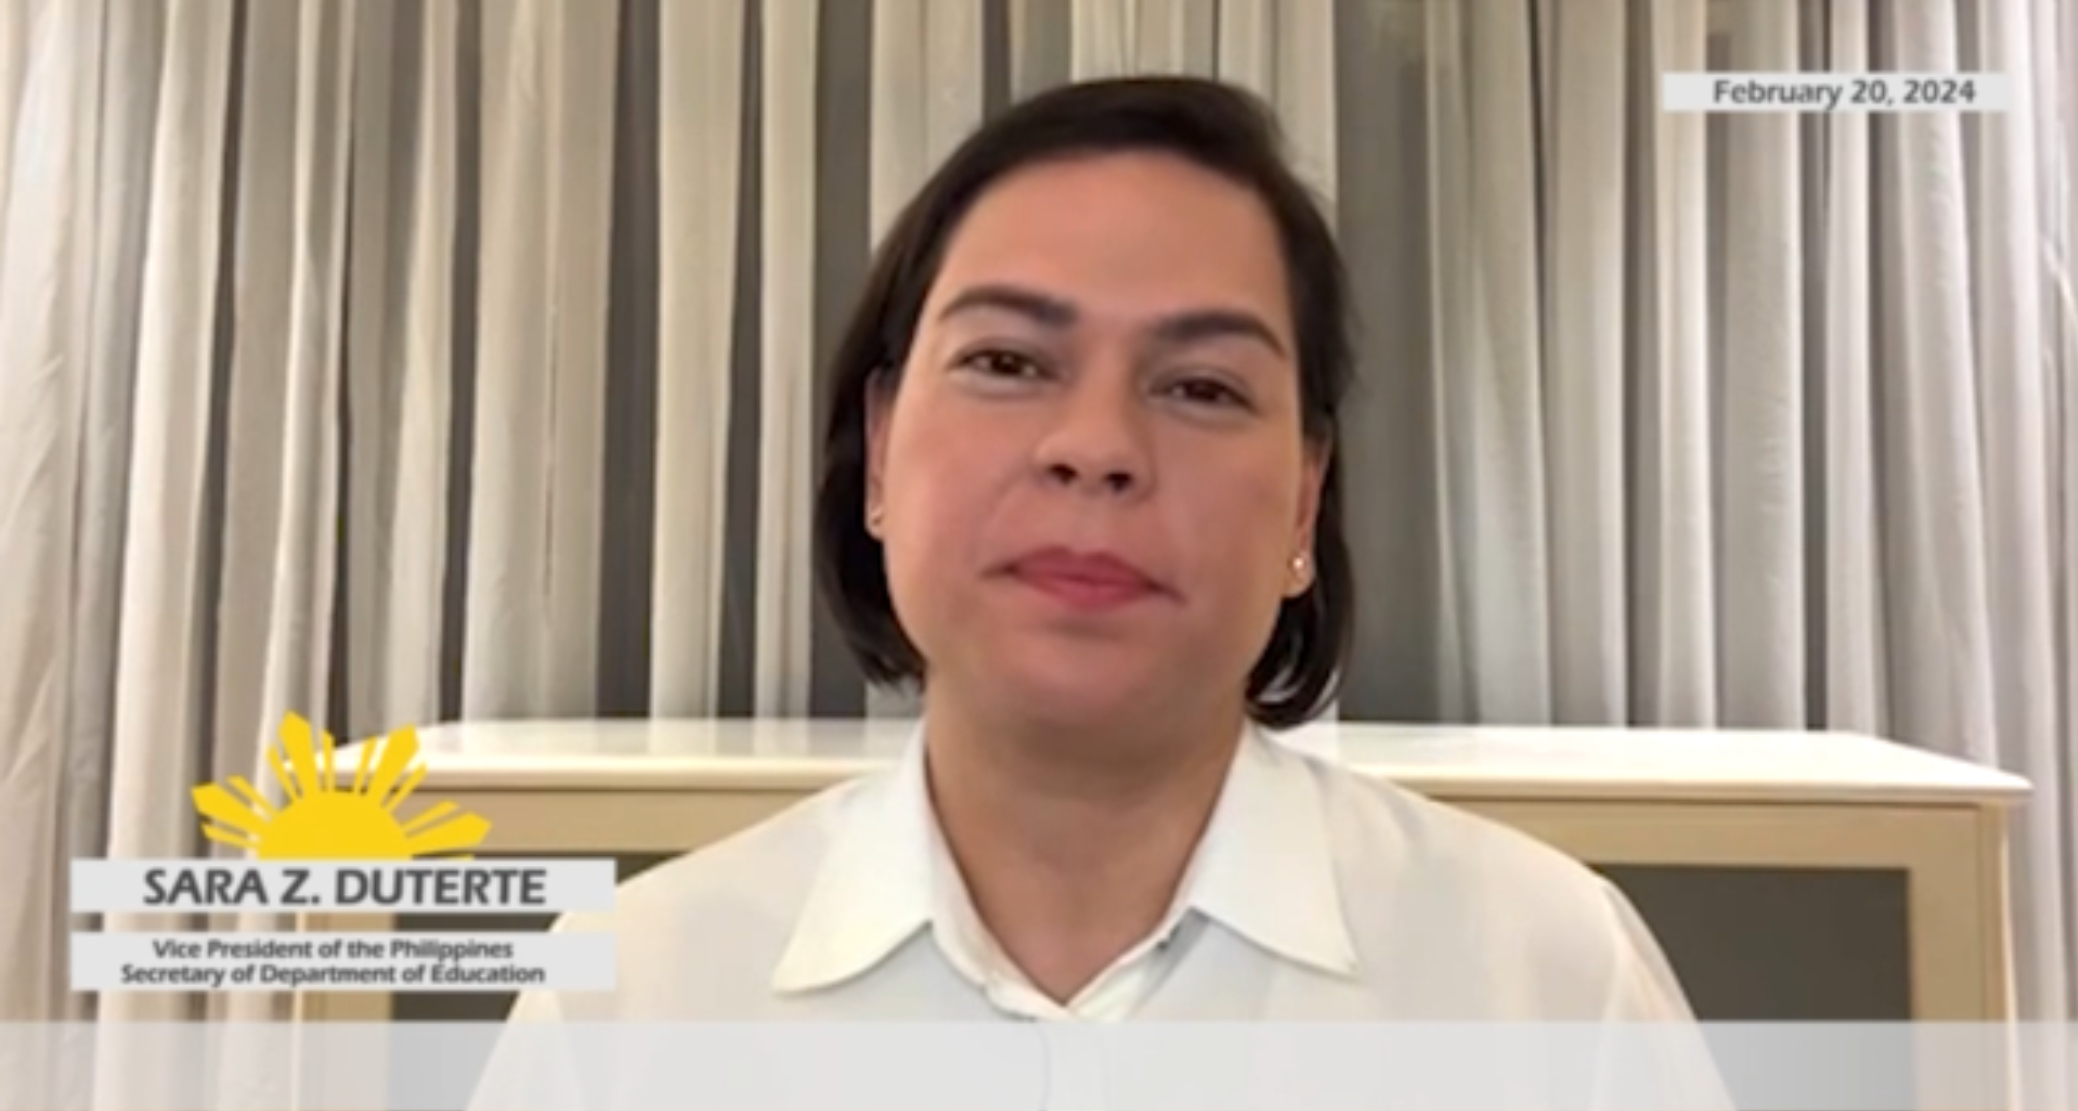 VP Sara Duterte undeterred by ‘attacks possibly by presidential aspirants’